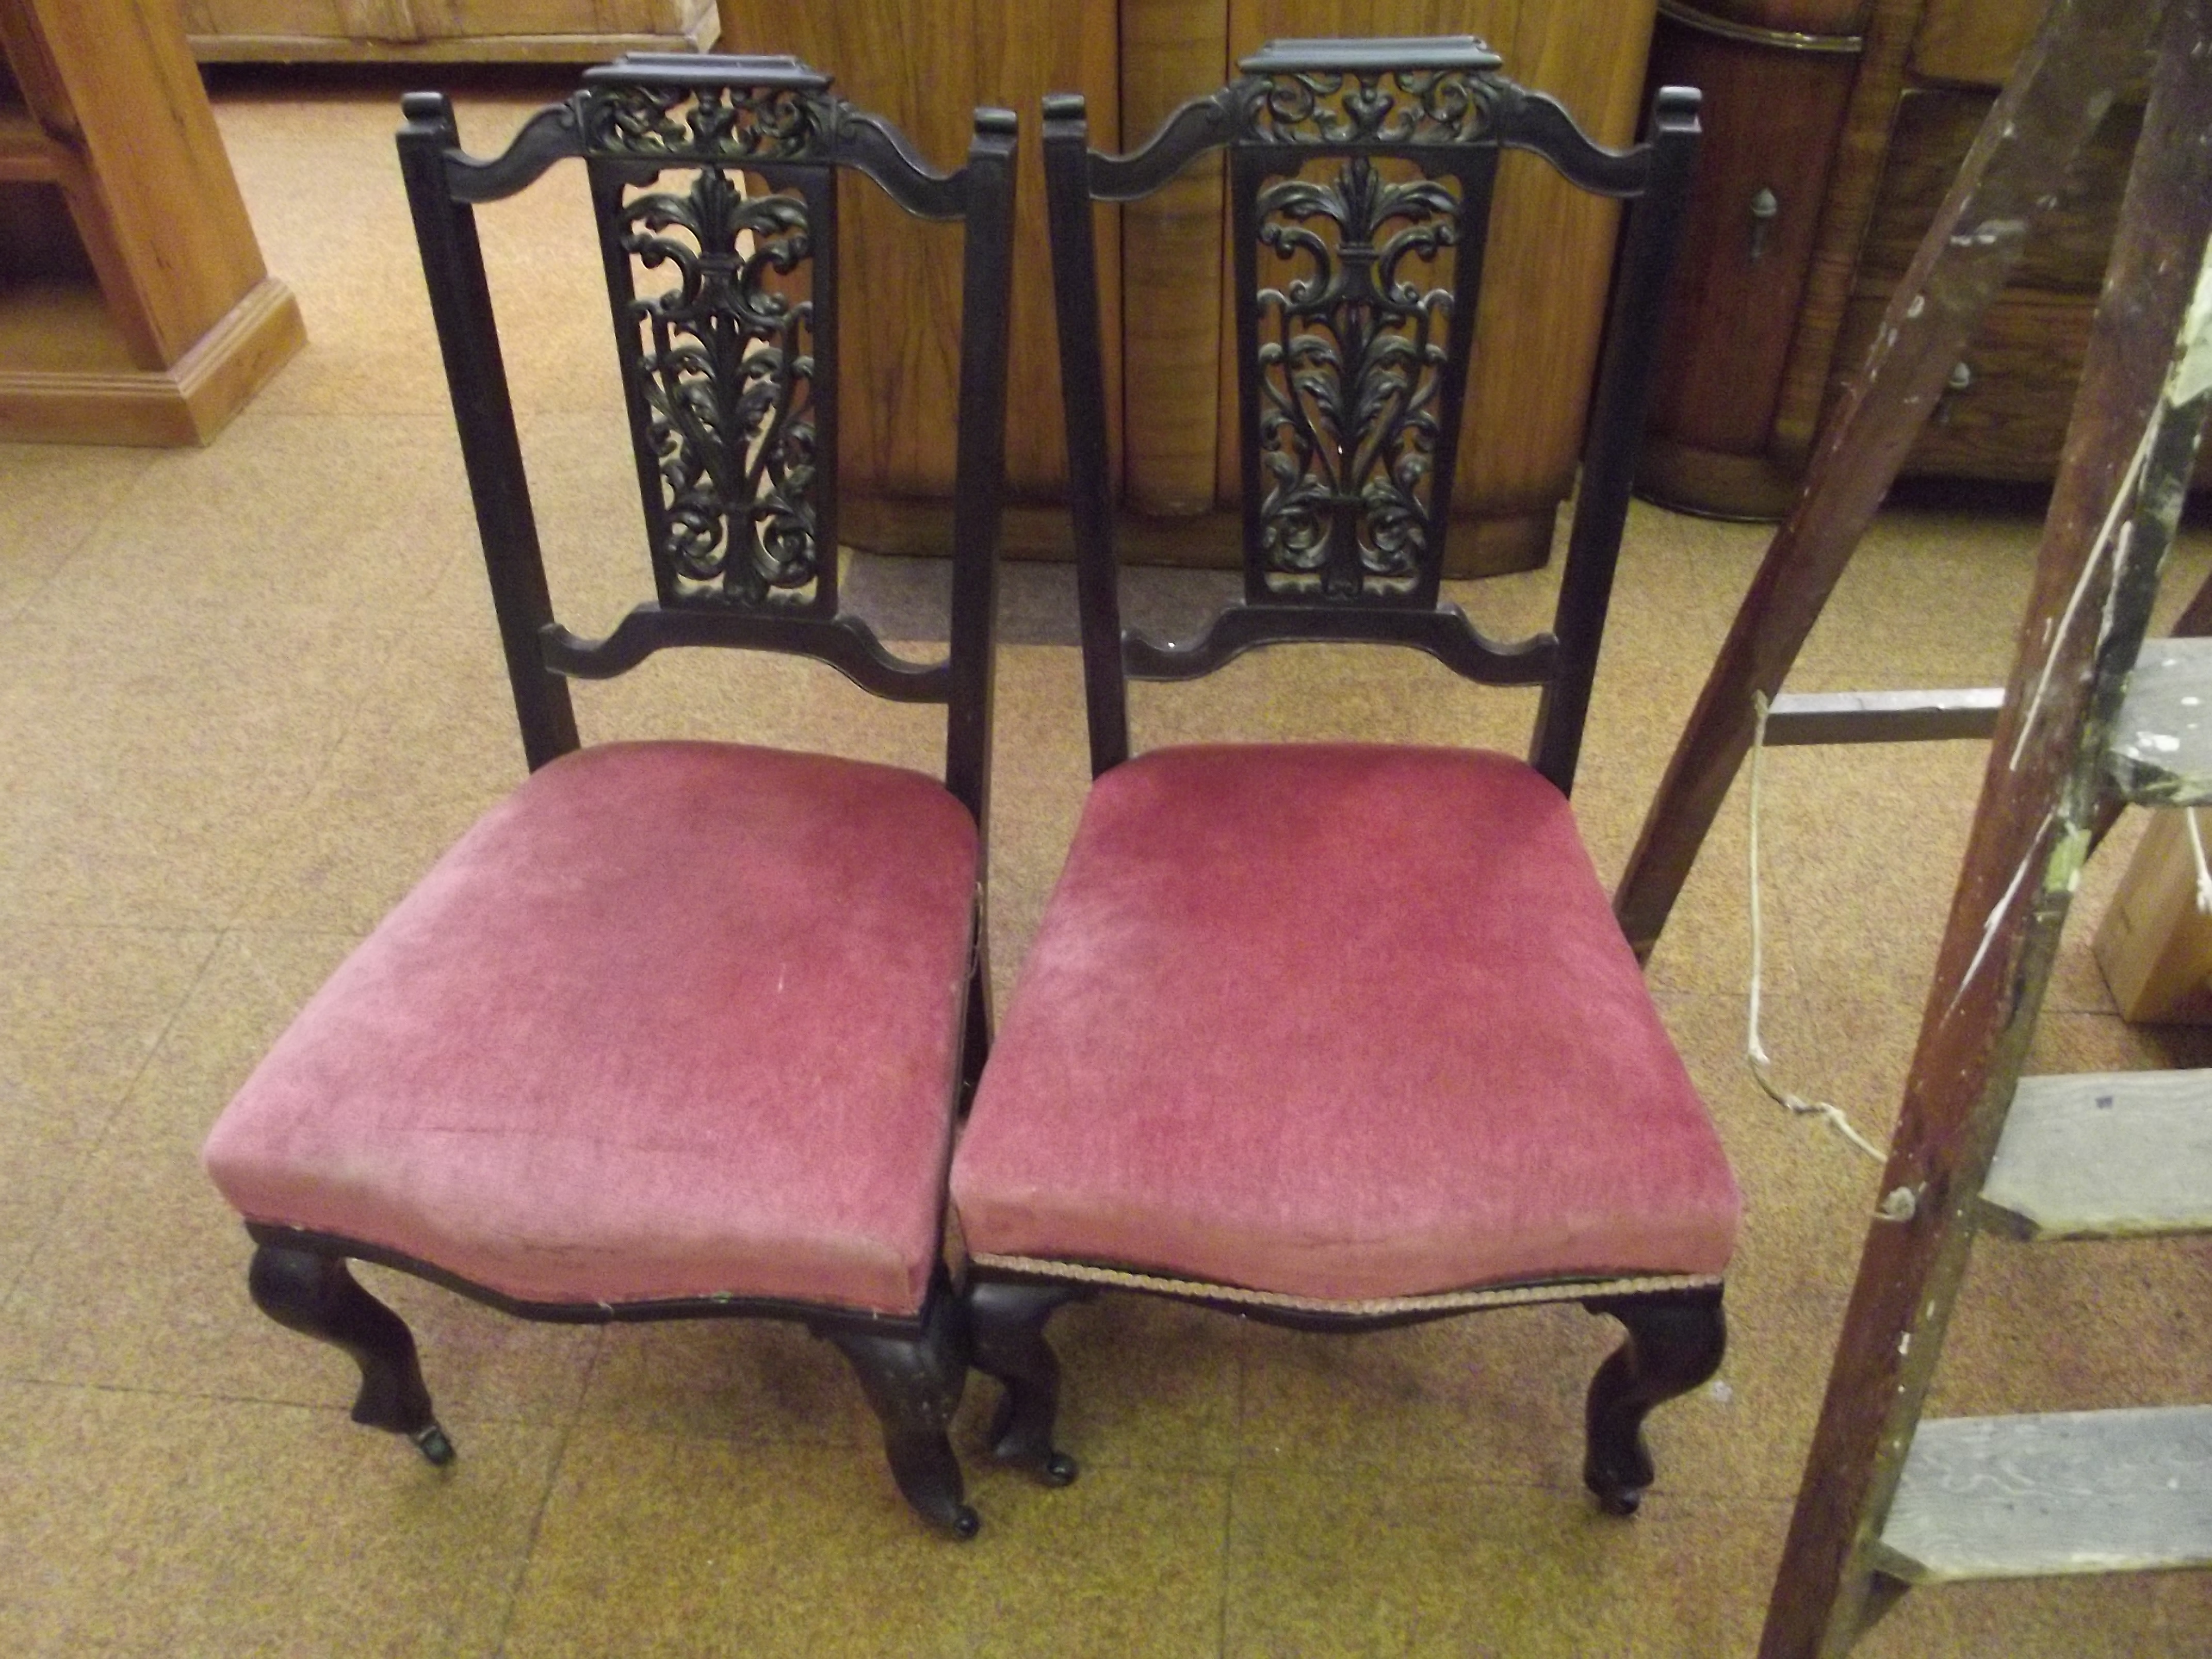 Pair of early 20th century pierced back chairs